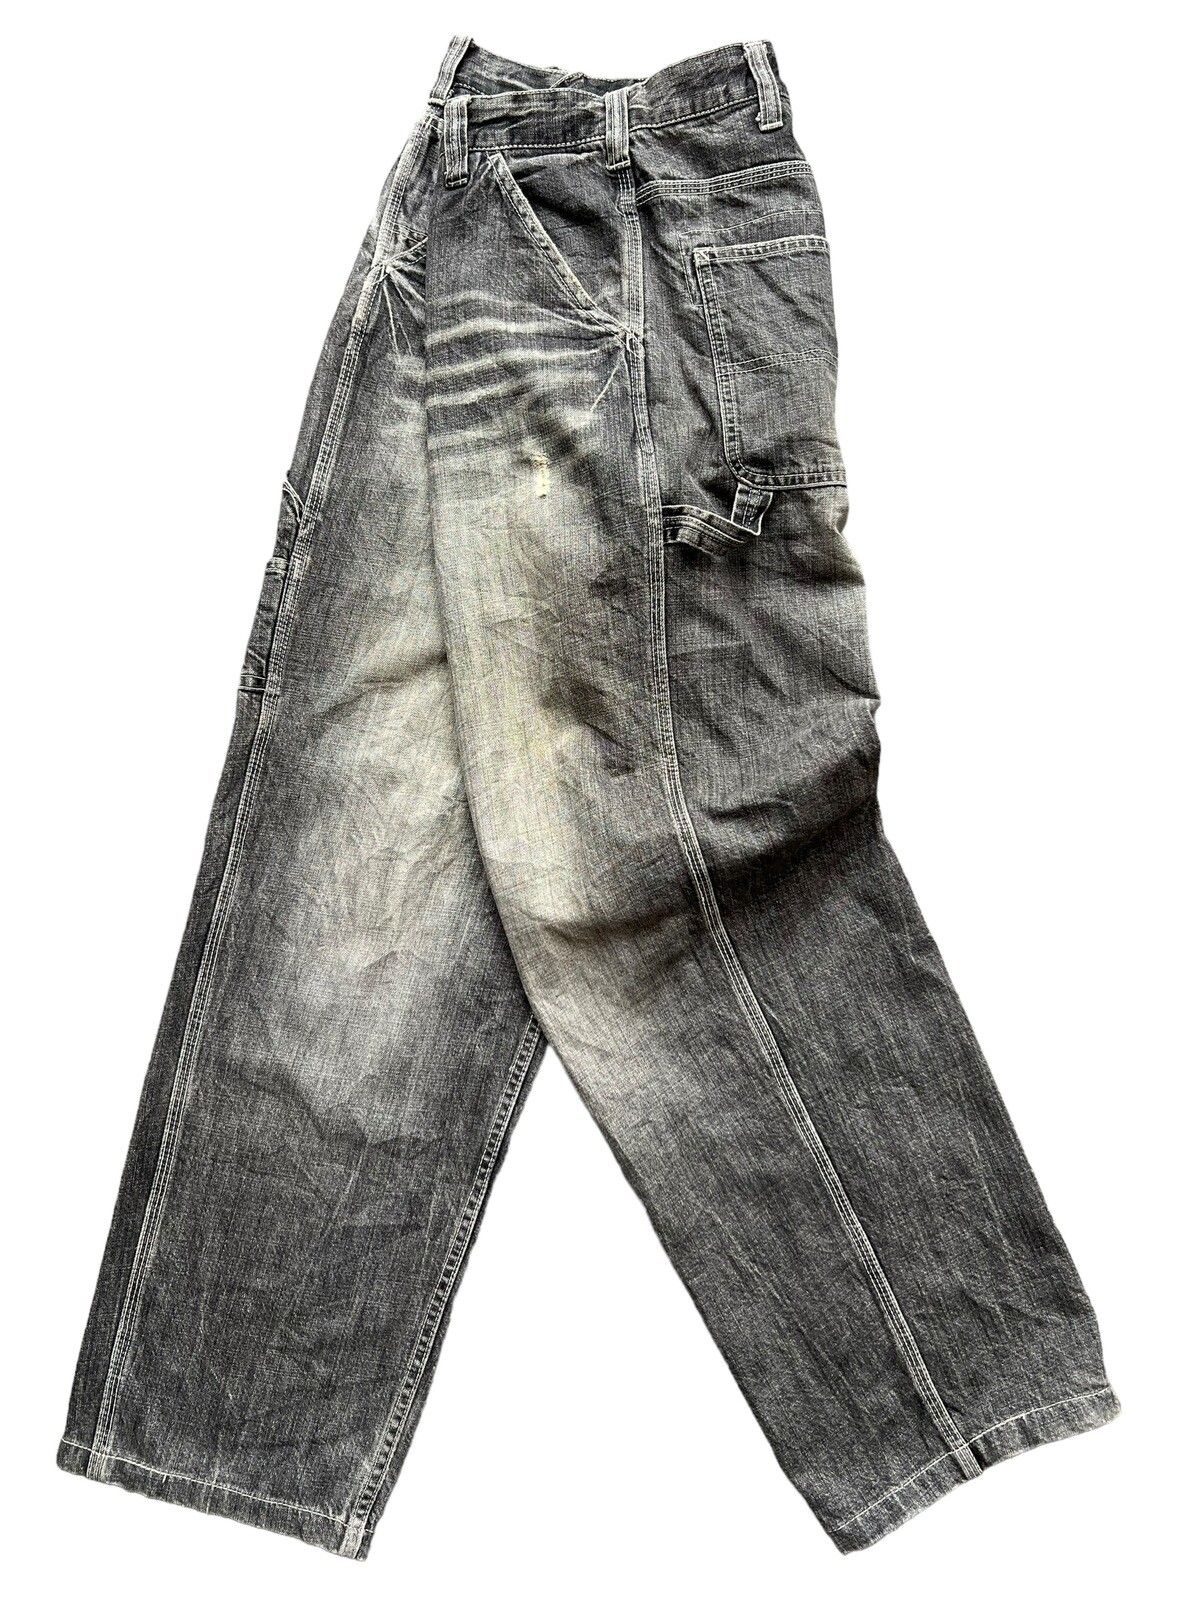 Crazy Vtg 90s Dickies Carpenter Faded Distressed Baggy Pants - 1